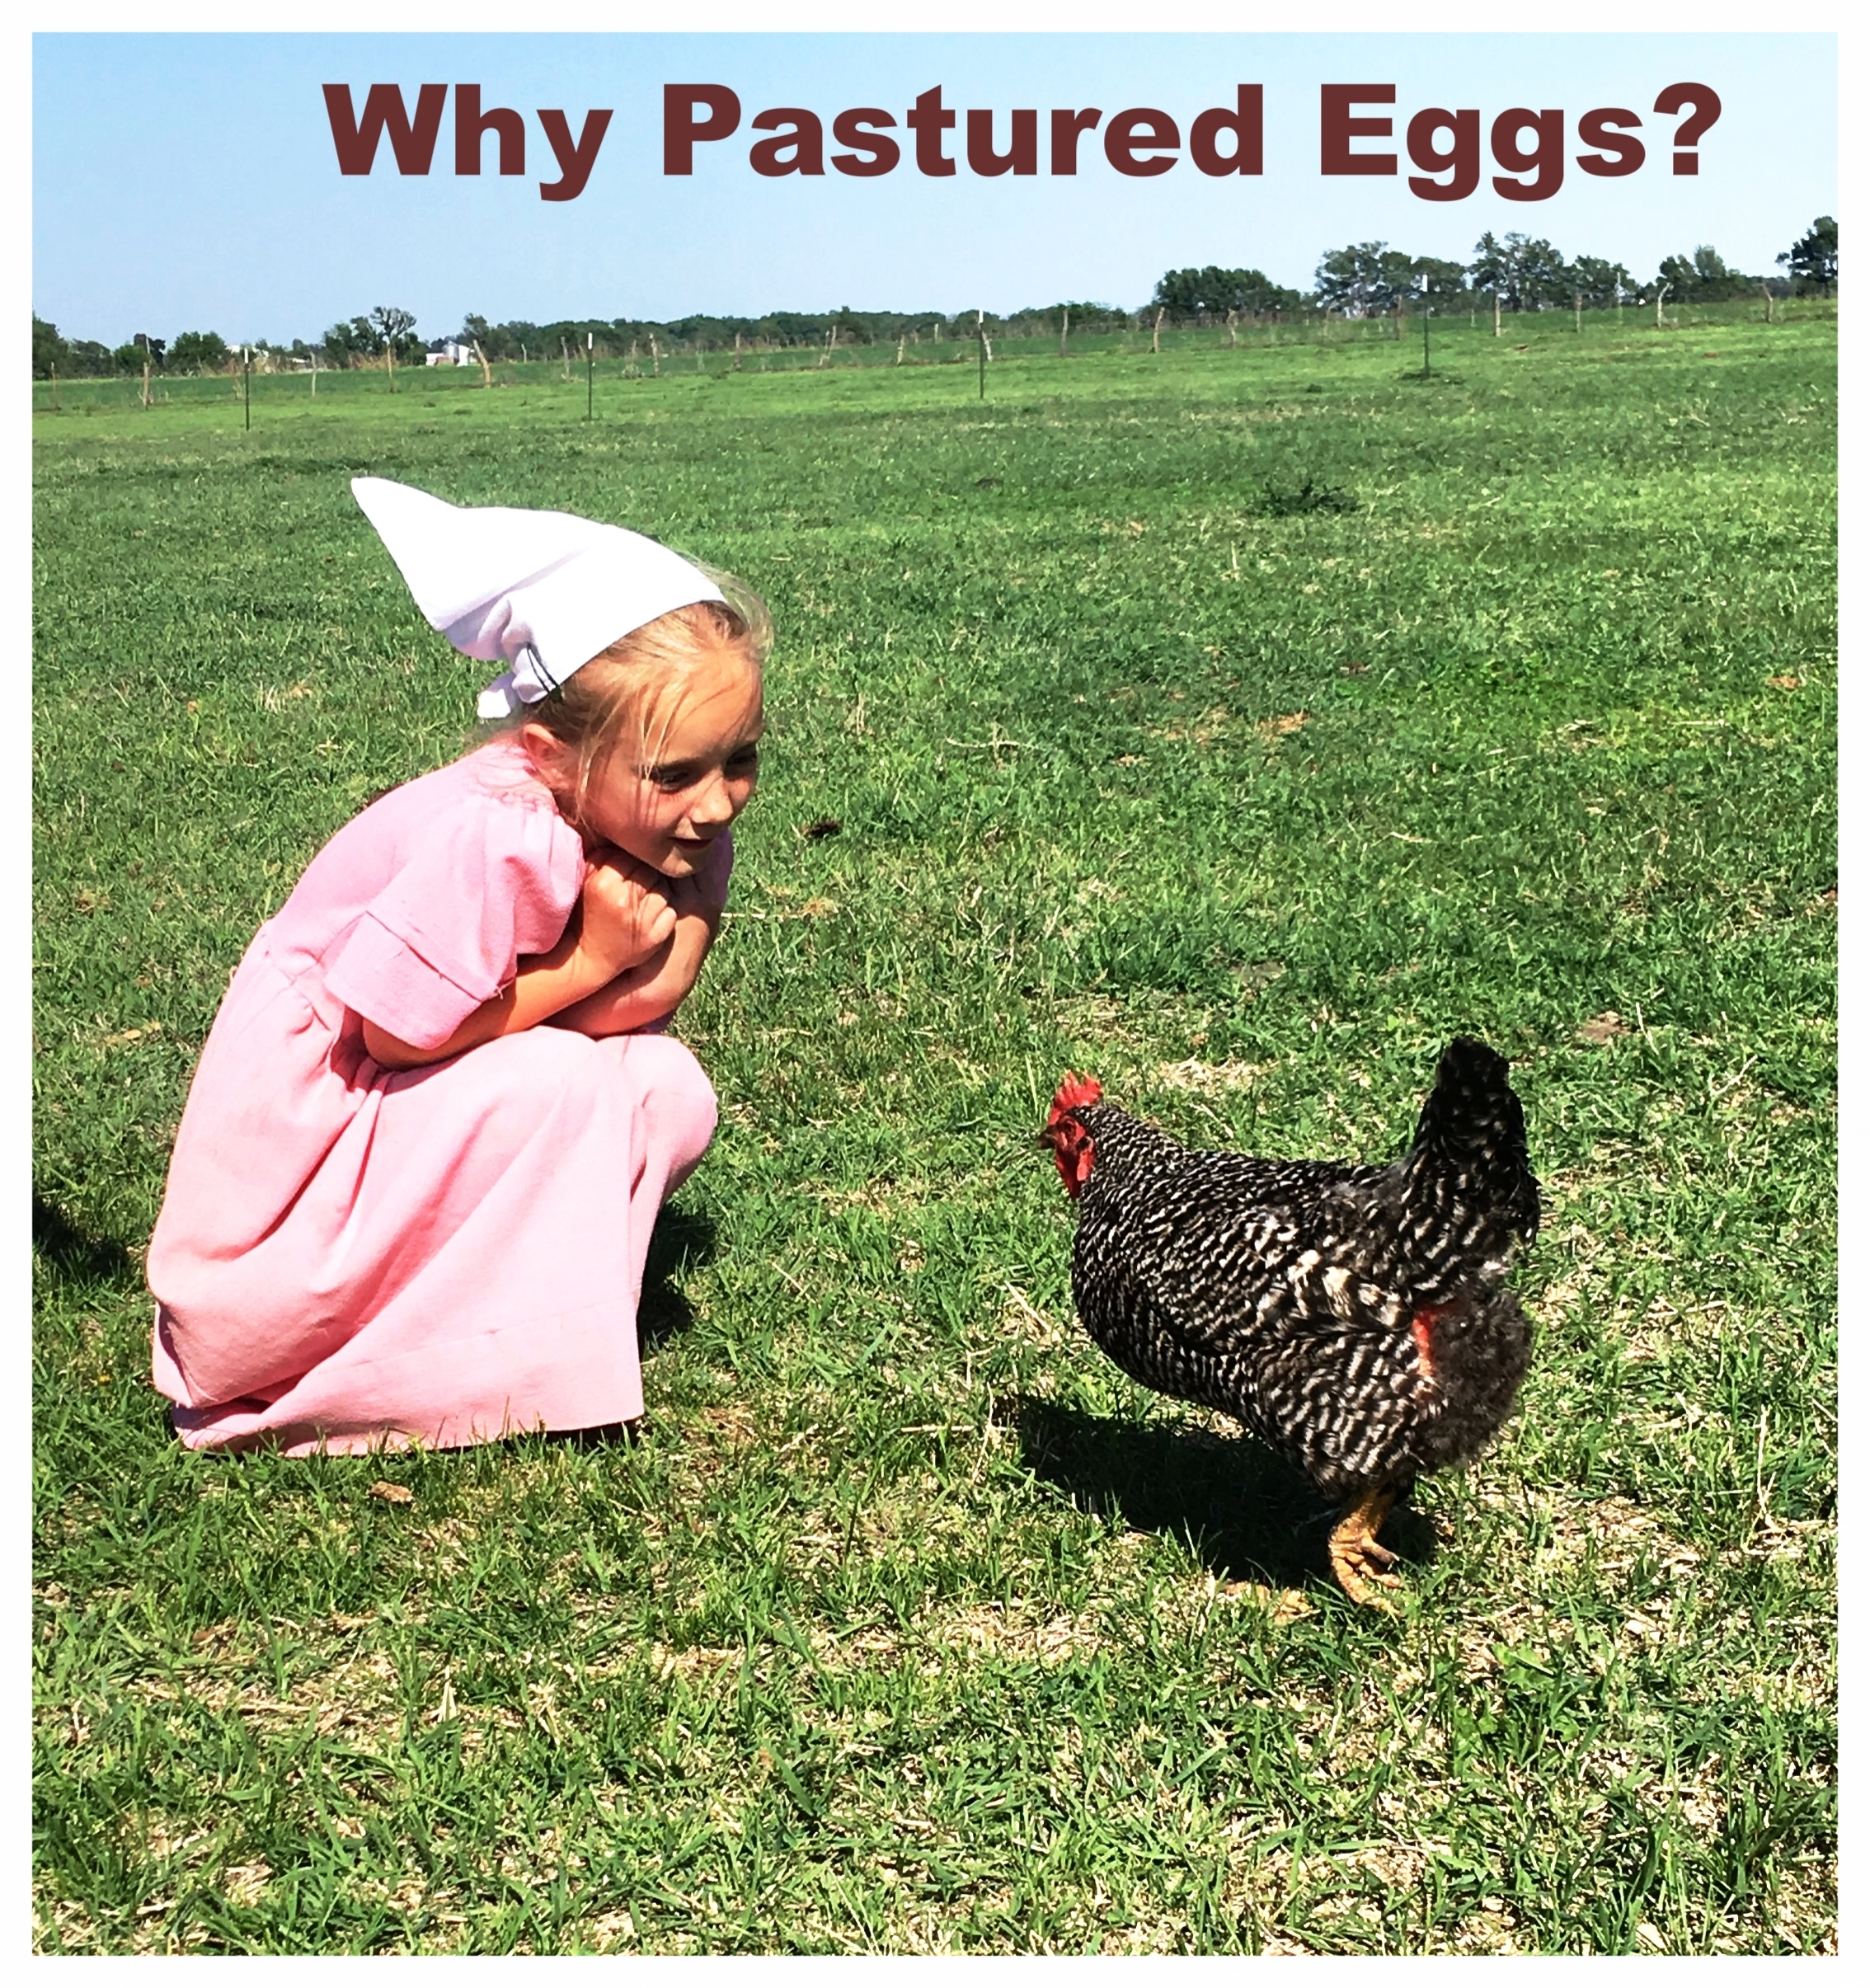 Free Range vs. Pasture-Raised: What's the Difference?